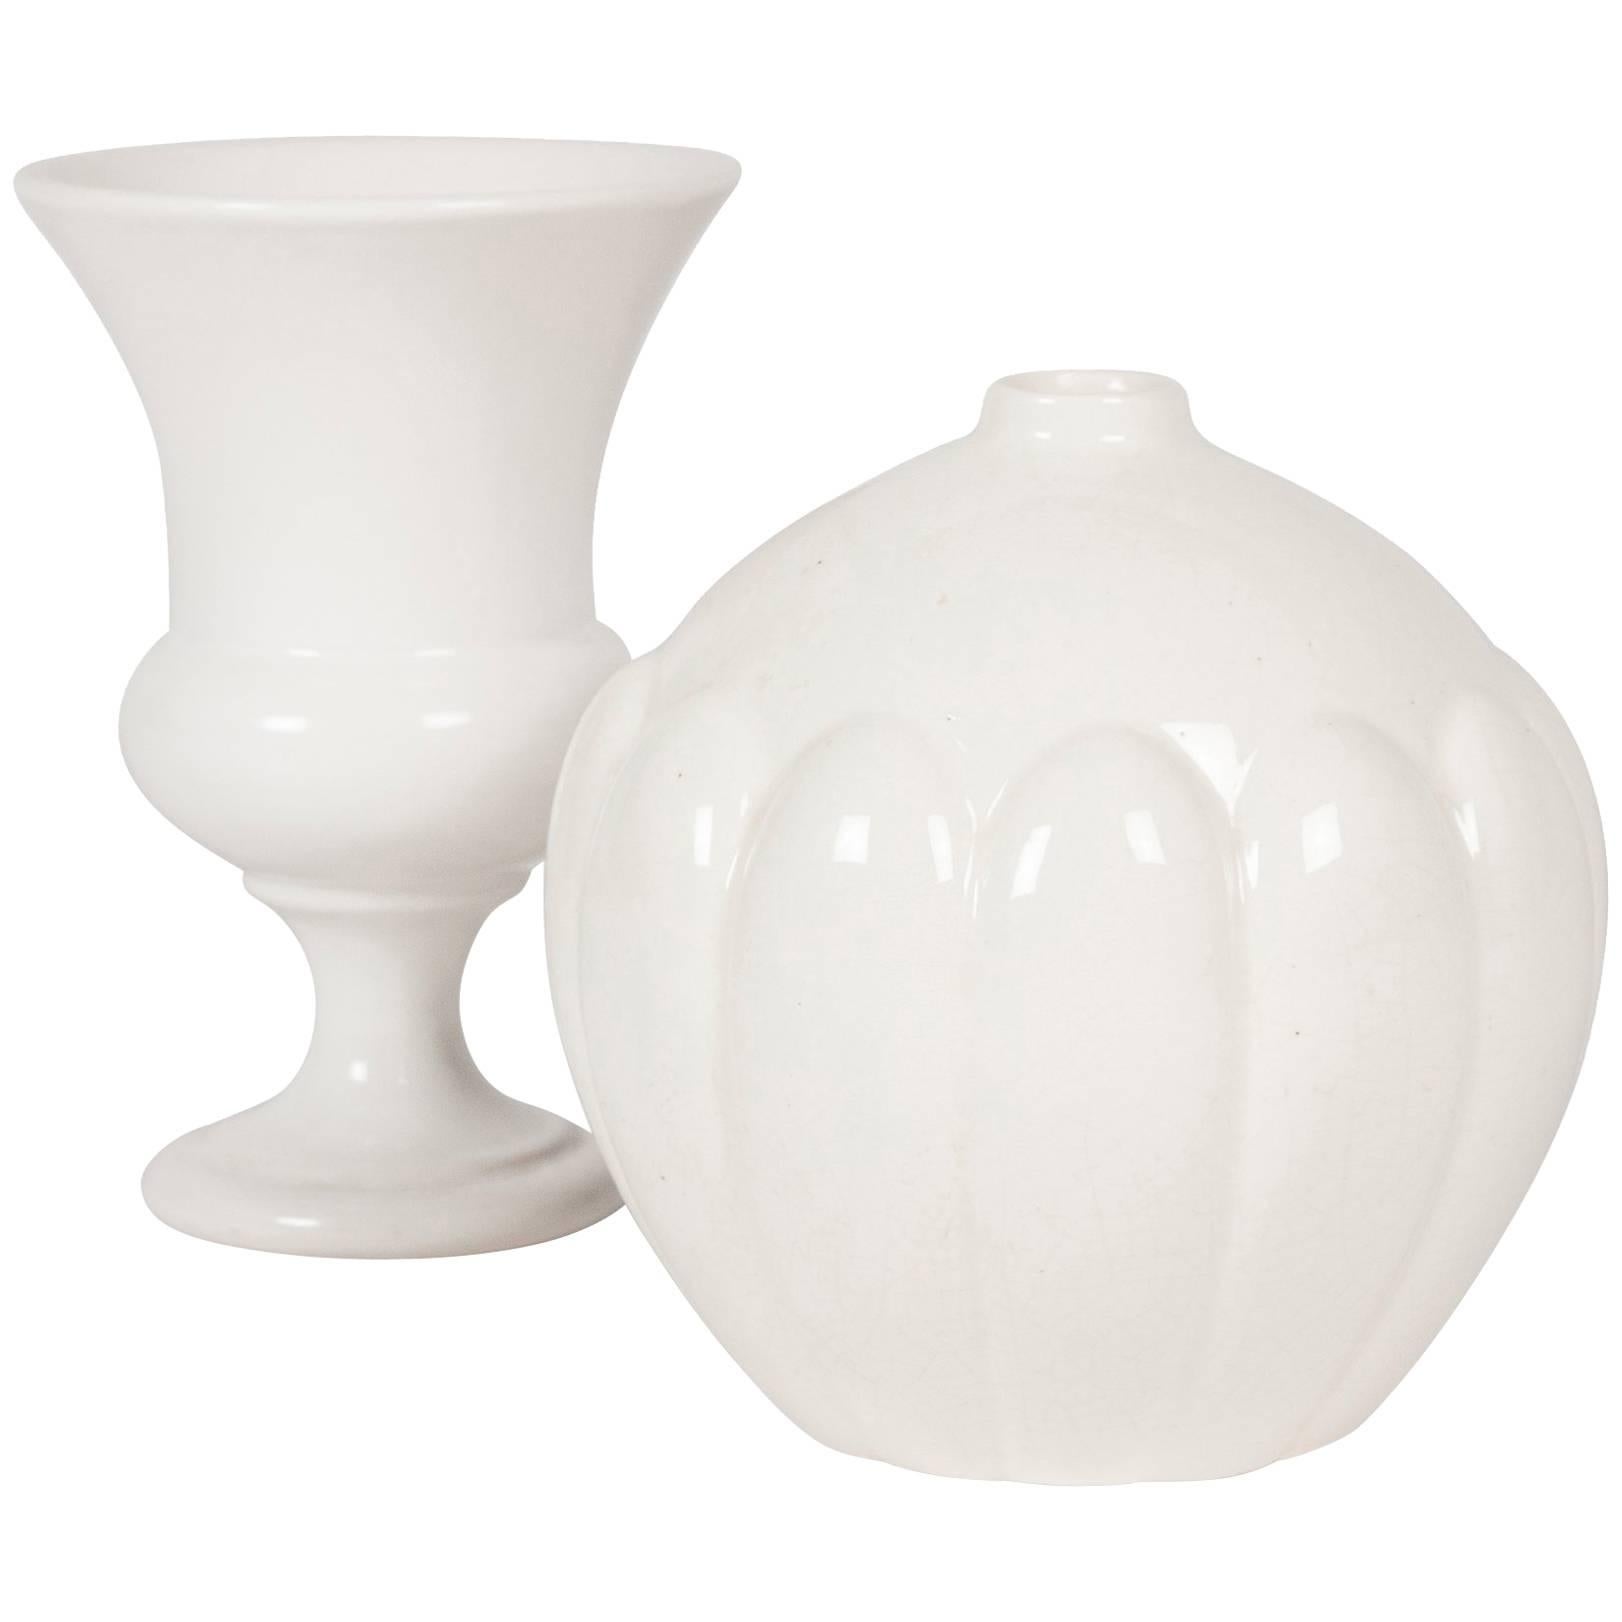 Two White Ceramic Vases, French, 1930s For Sale